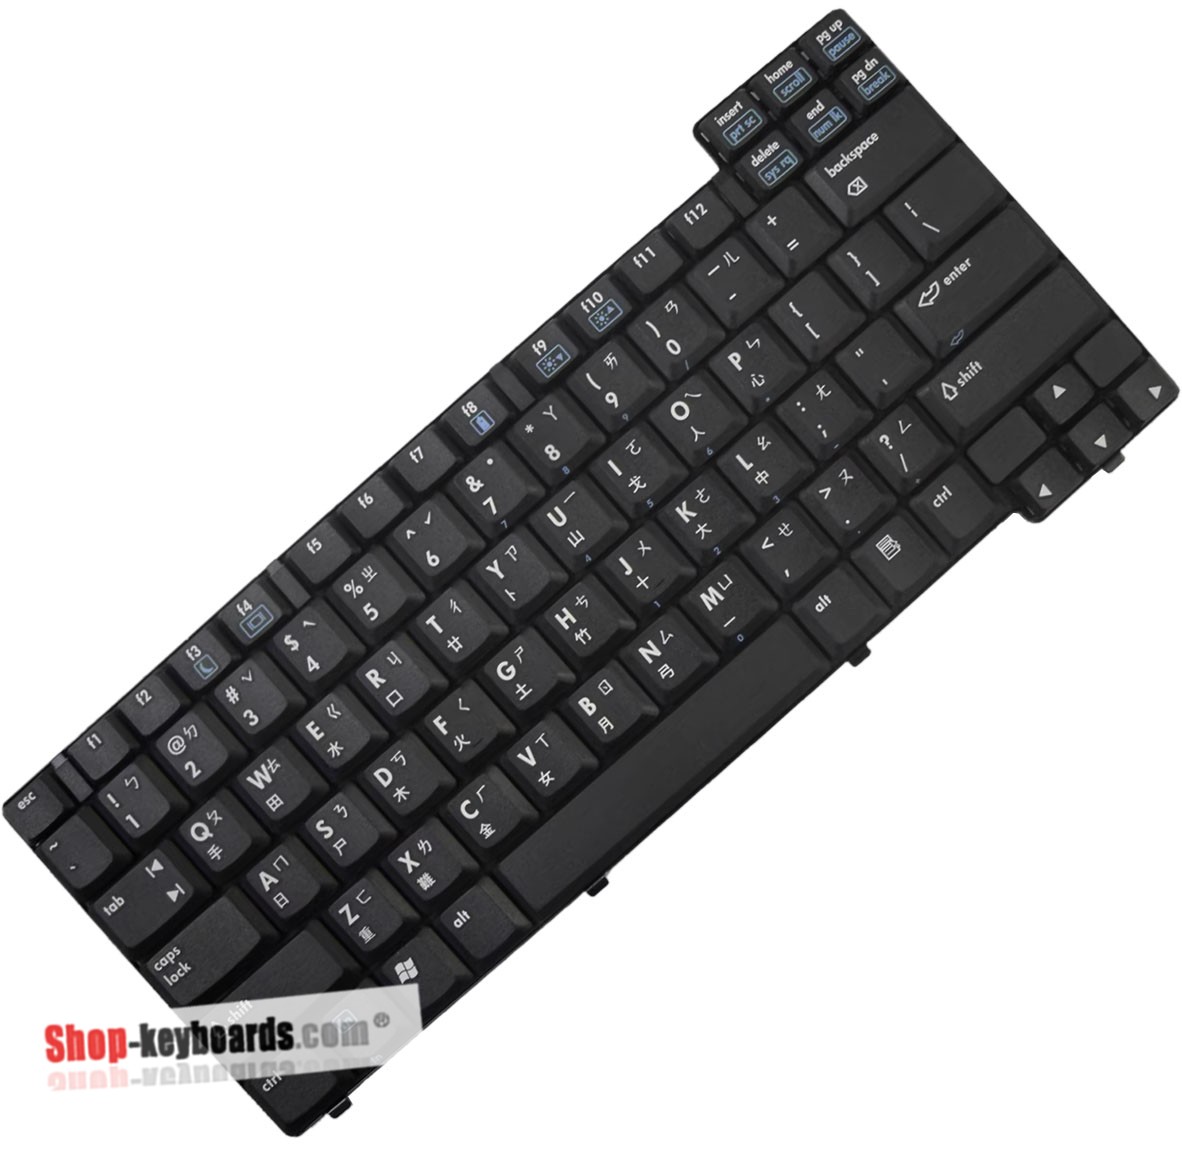 HP Business Notebook nx6300 Keyboard replacement